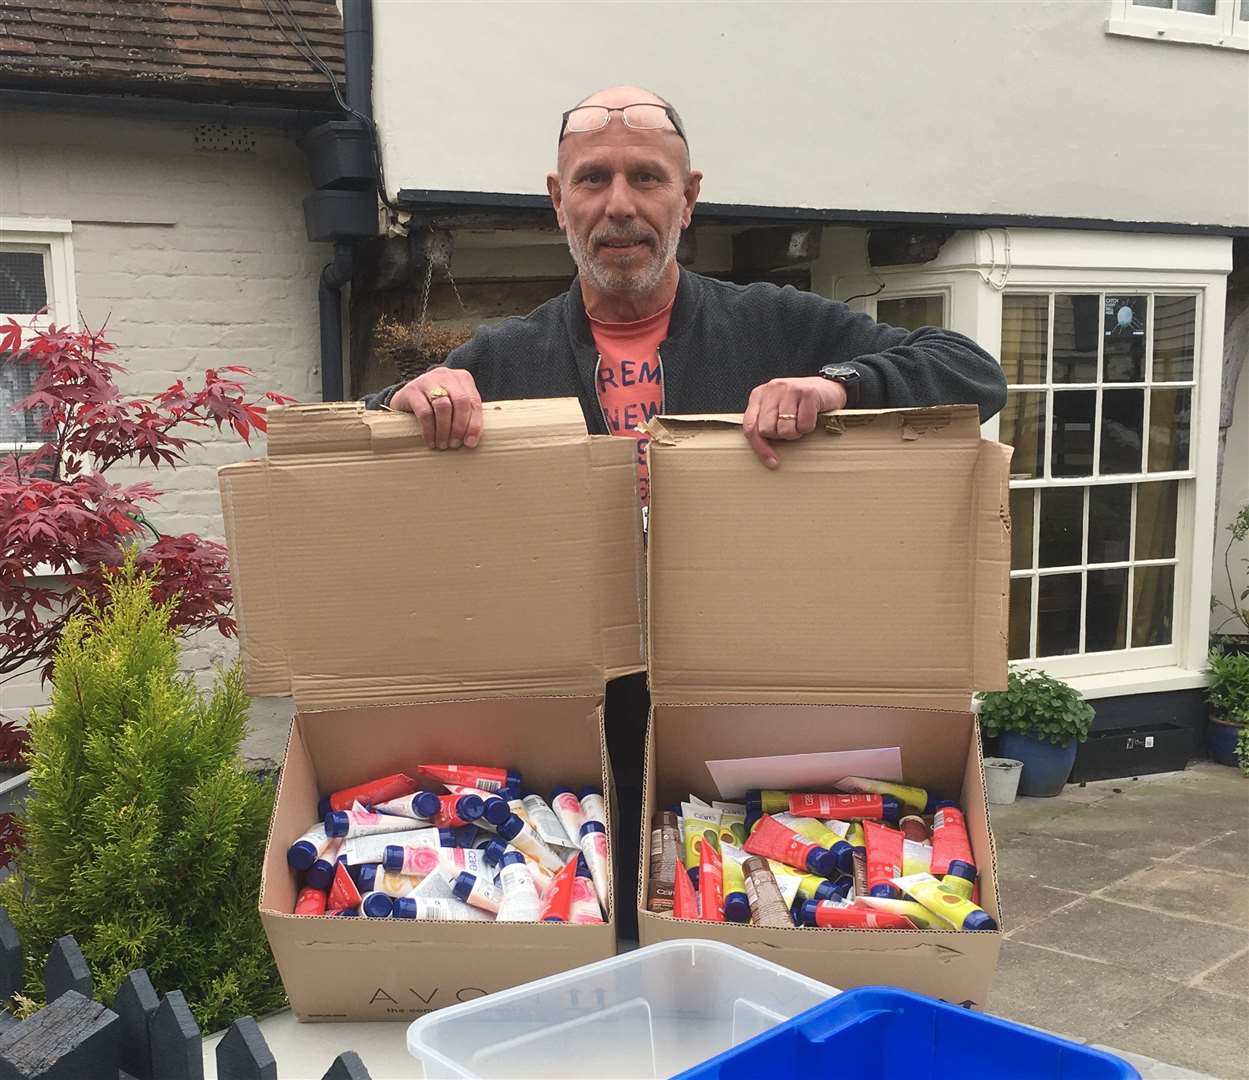 The 180 tubes of handcream have been dropped off at The Bull, in Faversham, who are going to distribute them to NHS workers.